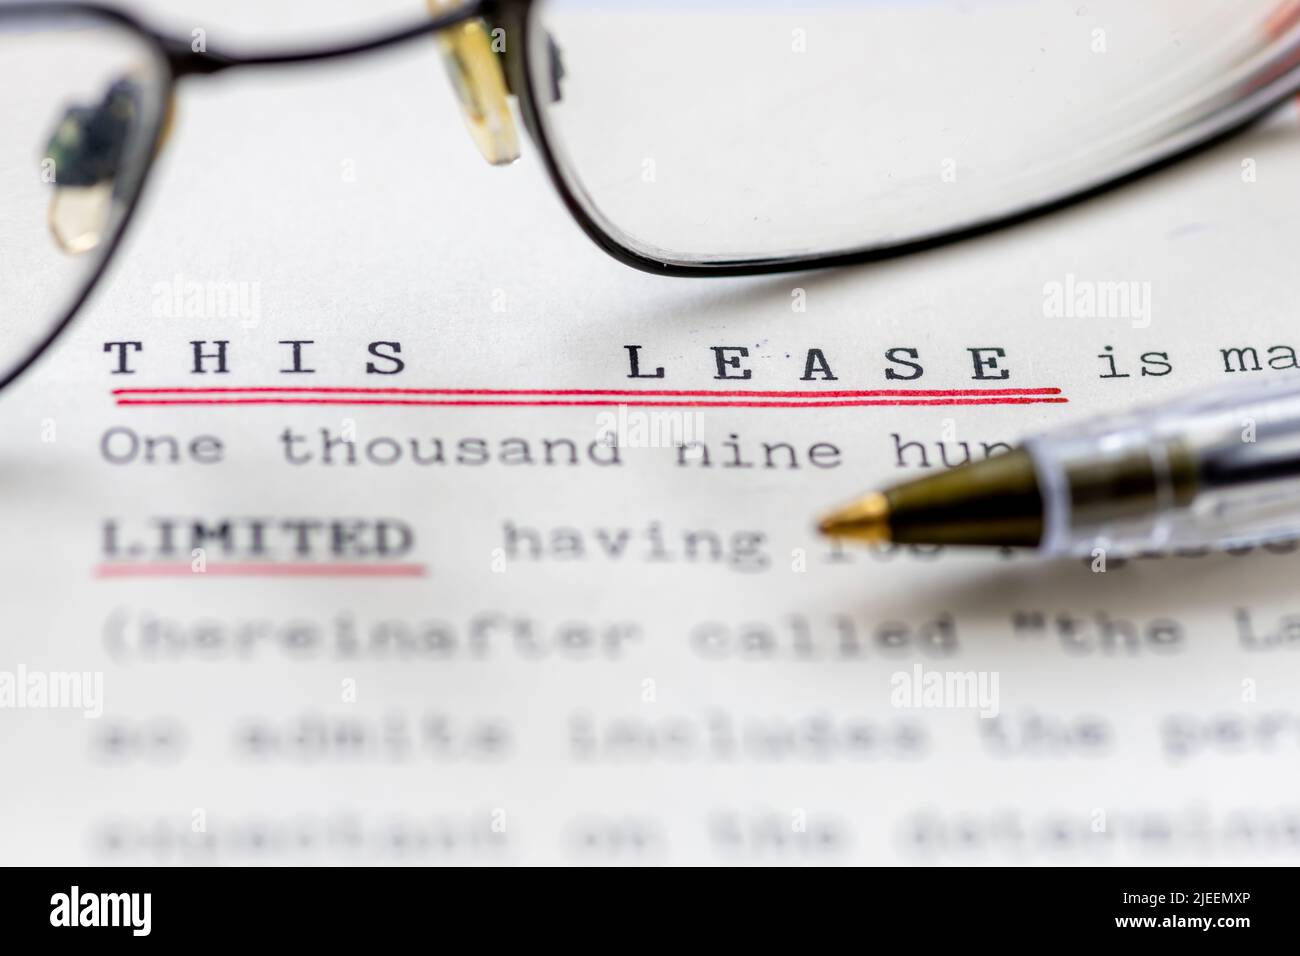 Close up of a lease for a property shown with eye glasses. A legal document for long term rental or ownership of a business premise or home. Stock Photo